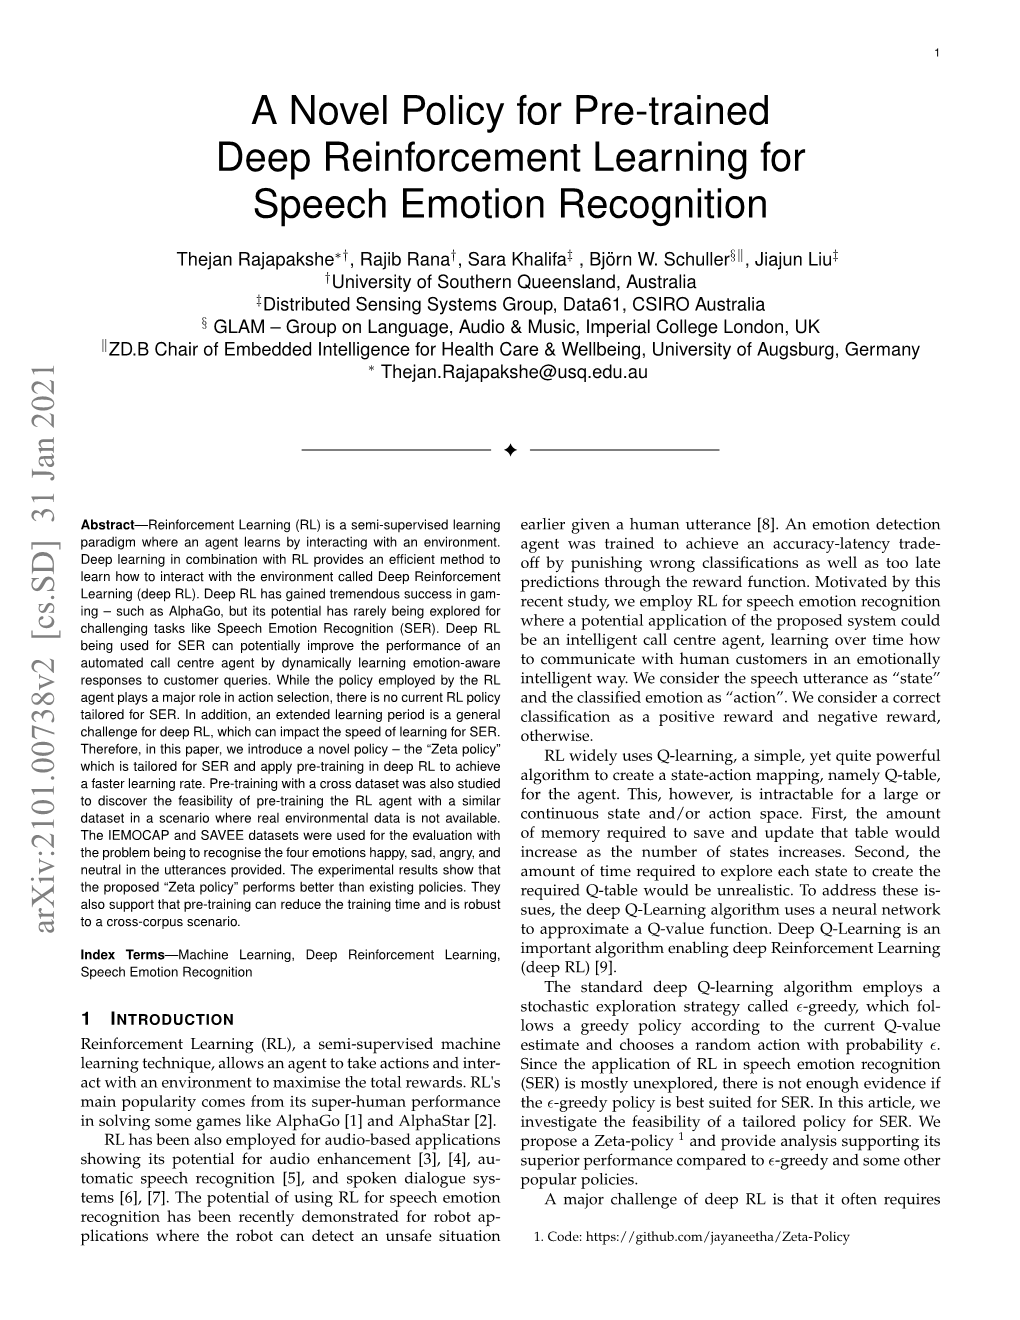 A Novel Policy for Pre-Trained Deep Reinforcement Learning for Speech Emotion Recognition